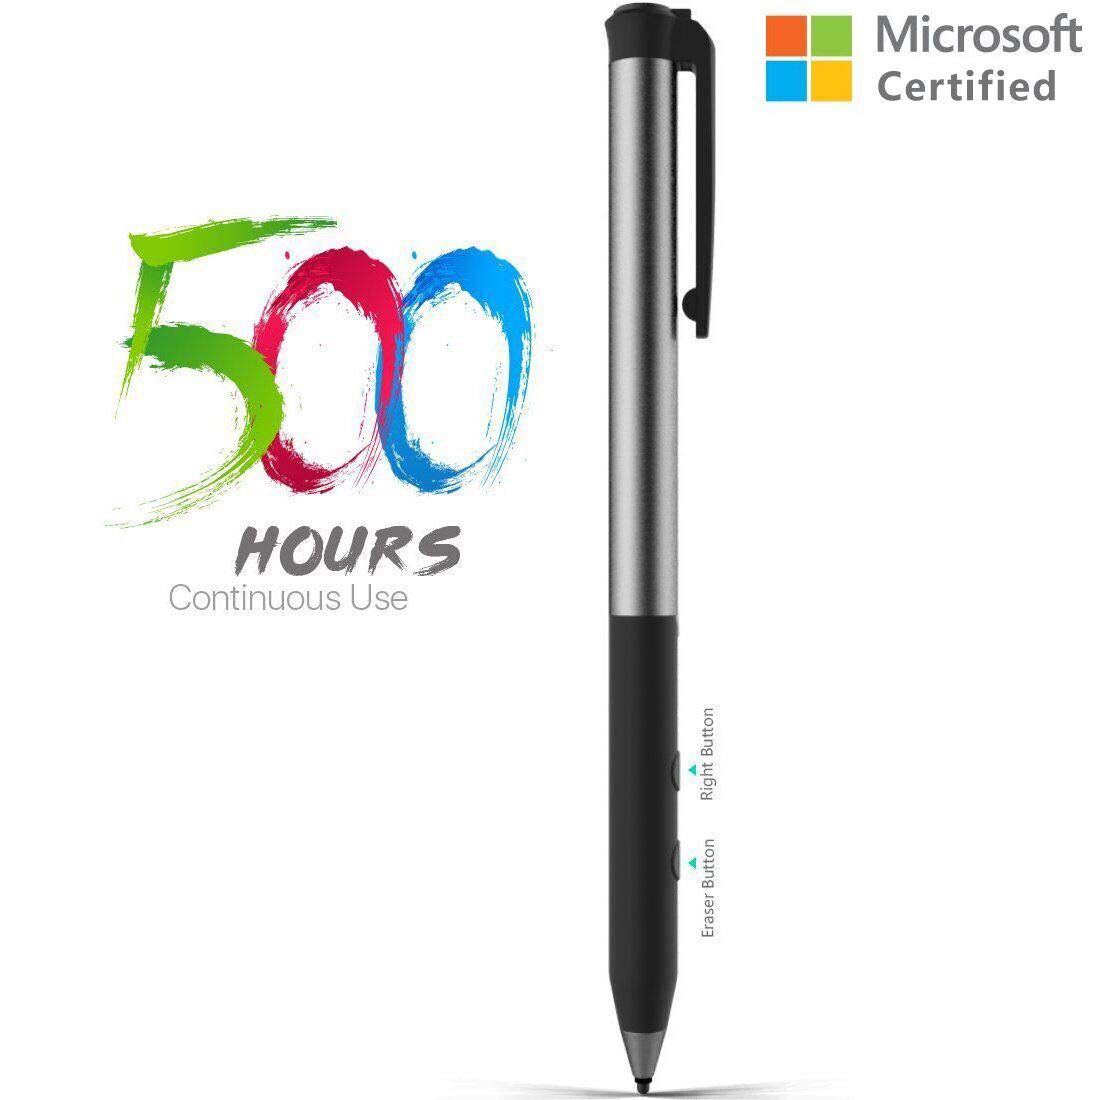 New Microsoft Certified Surface Pen Support 500Hrs Working & 180Day Standby Surface Pro Pen 4096 Pressure Sensitivity Rechargeable Surface Go Pen For